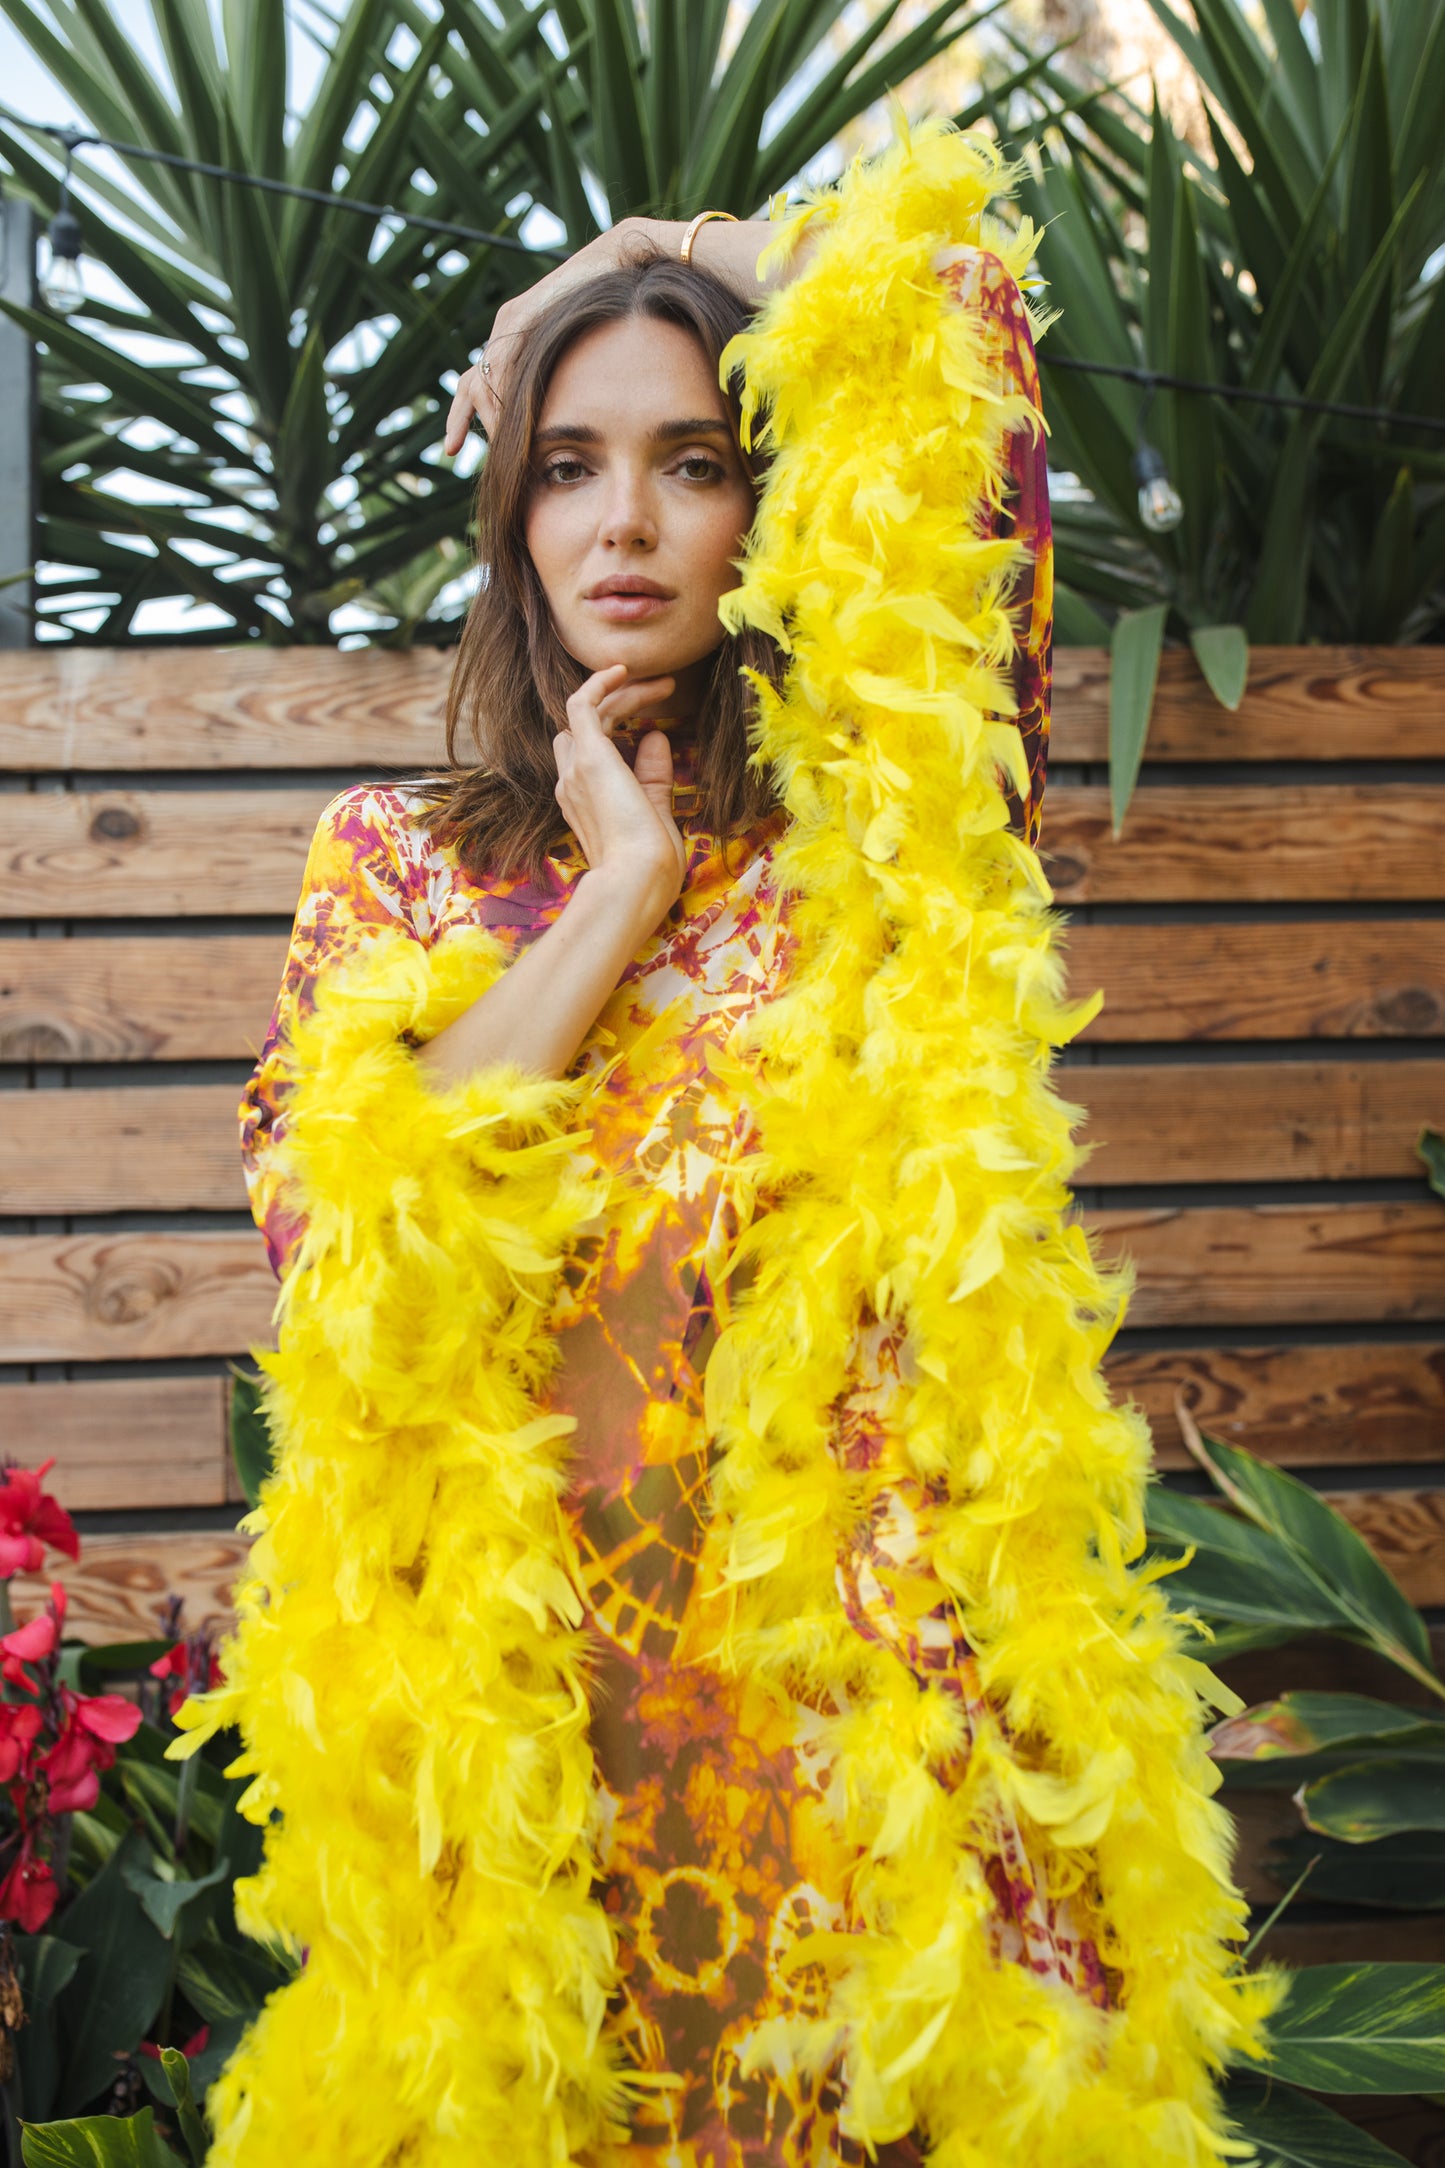 The Intra Dimensiona Mockneck Feather Caftan with slip. A vibrant, fiery abstract print featuring reds and oranges and yellows printed on a semi-sheer, super soft mesh with canary yellow feather border along sleeves and hem. A bohemian dress inspired by Old Hollywood and Palm Springs.